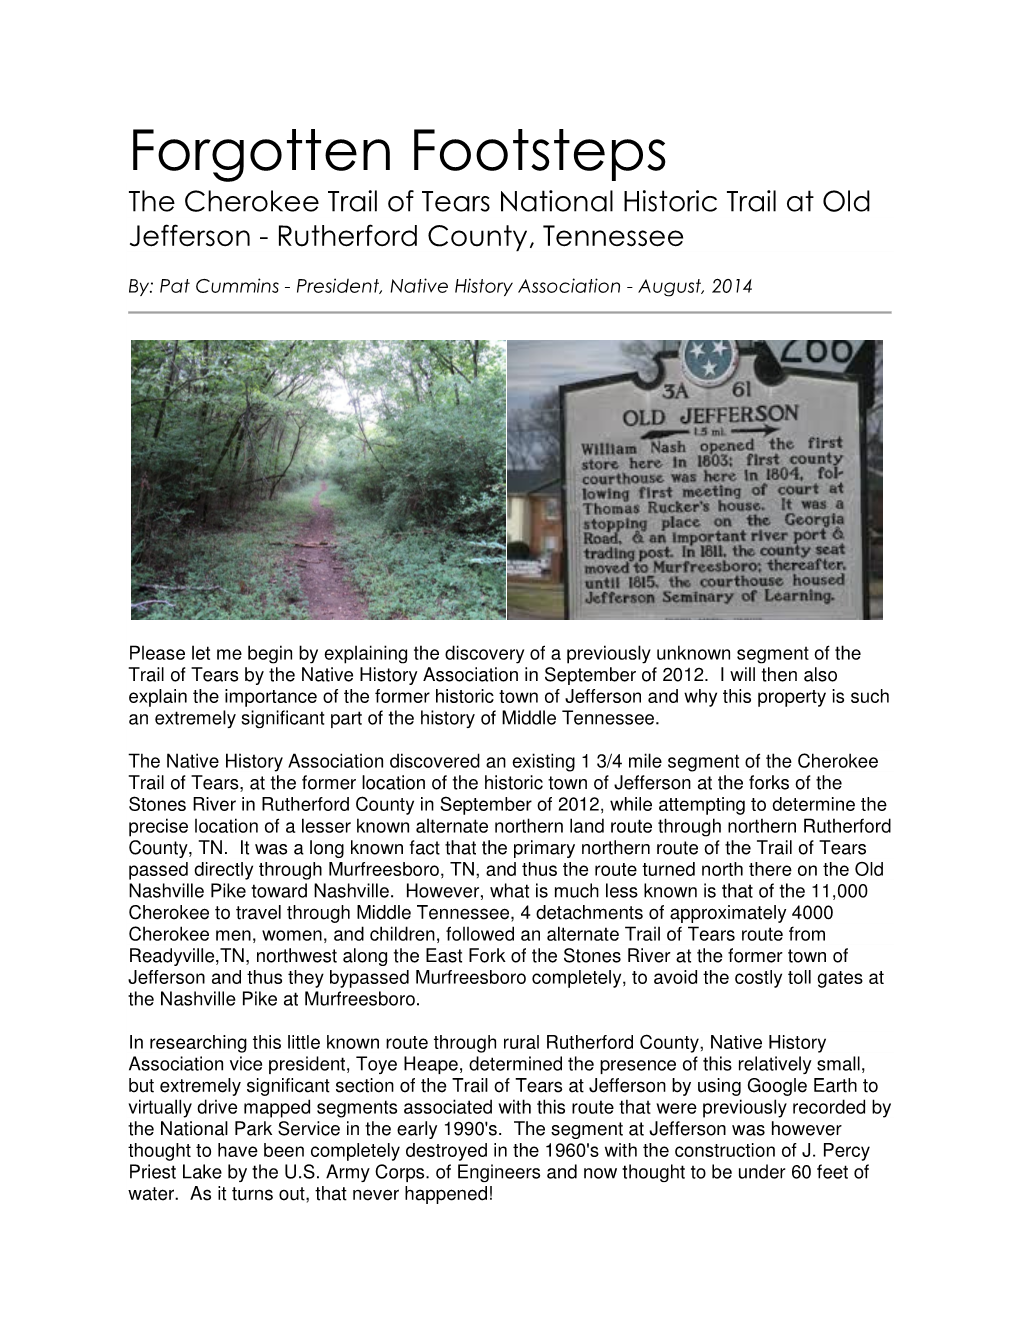 Forgotten Footsteps the Cherokee Trail of Tears National Historic Trail at Old Jefferson - Rutherford County, Tennessee